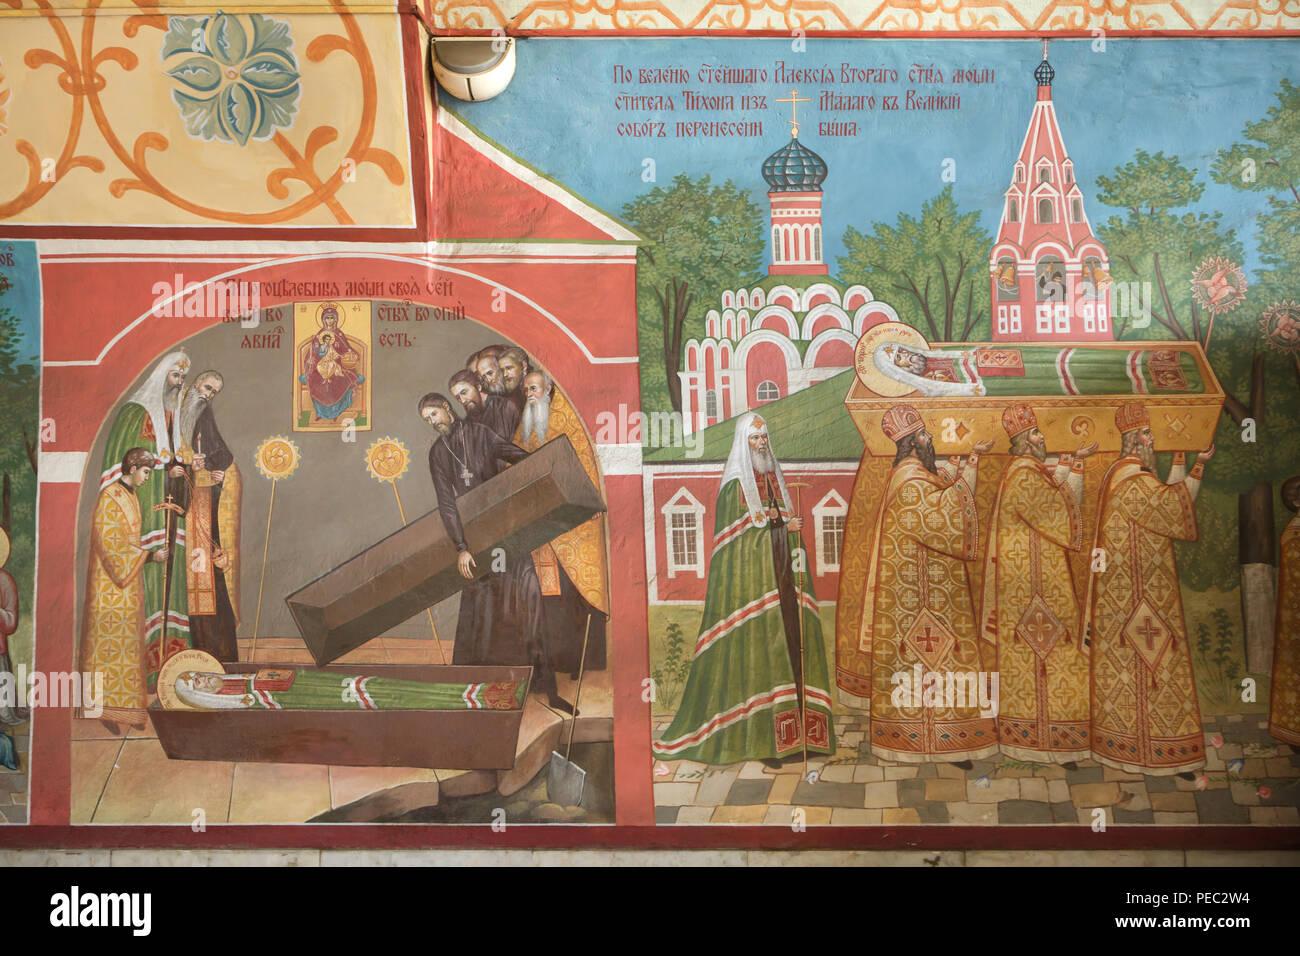 The discovery of the relics of Patriarch Tikhon of Moscow in the Donskoy Monastery on 19 February 1992 (L) and the transfer of the relics of Patriarch Tikhon from the winter church to the summer cathedral of the Donskoy Monastery on 7 April 1996 depicted in the mural paintings in the west gate of the Donskoy Monastery in Moscow, Russia. Patriarch Alexius II of Moscow is depicted twice next to the coffin. The winter church of the Donskoy Monastery is depicted in the background. Stock Photo